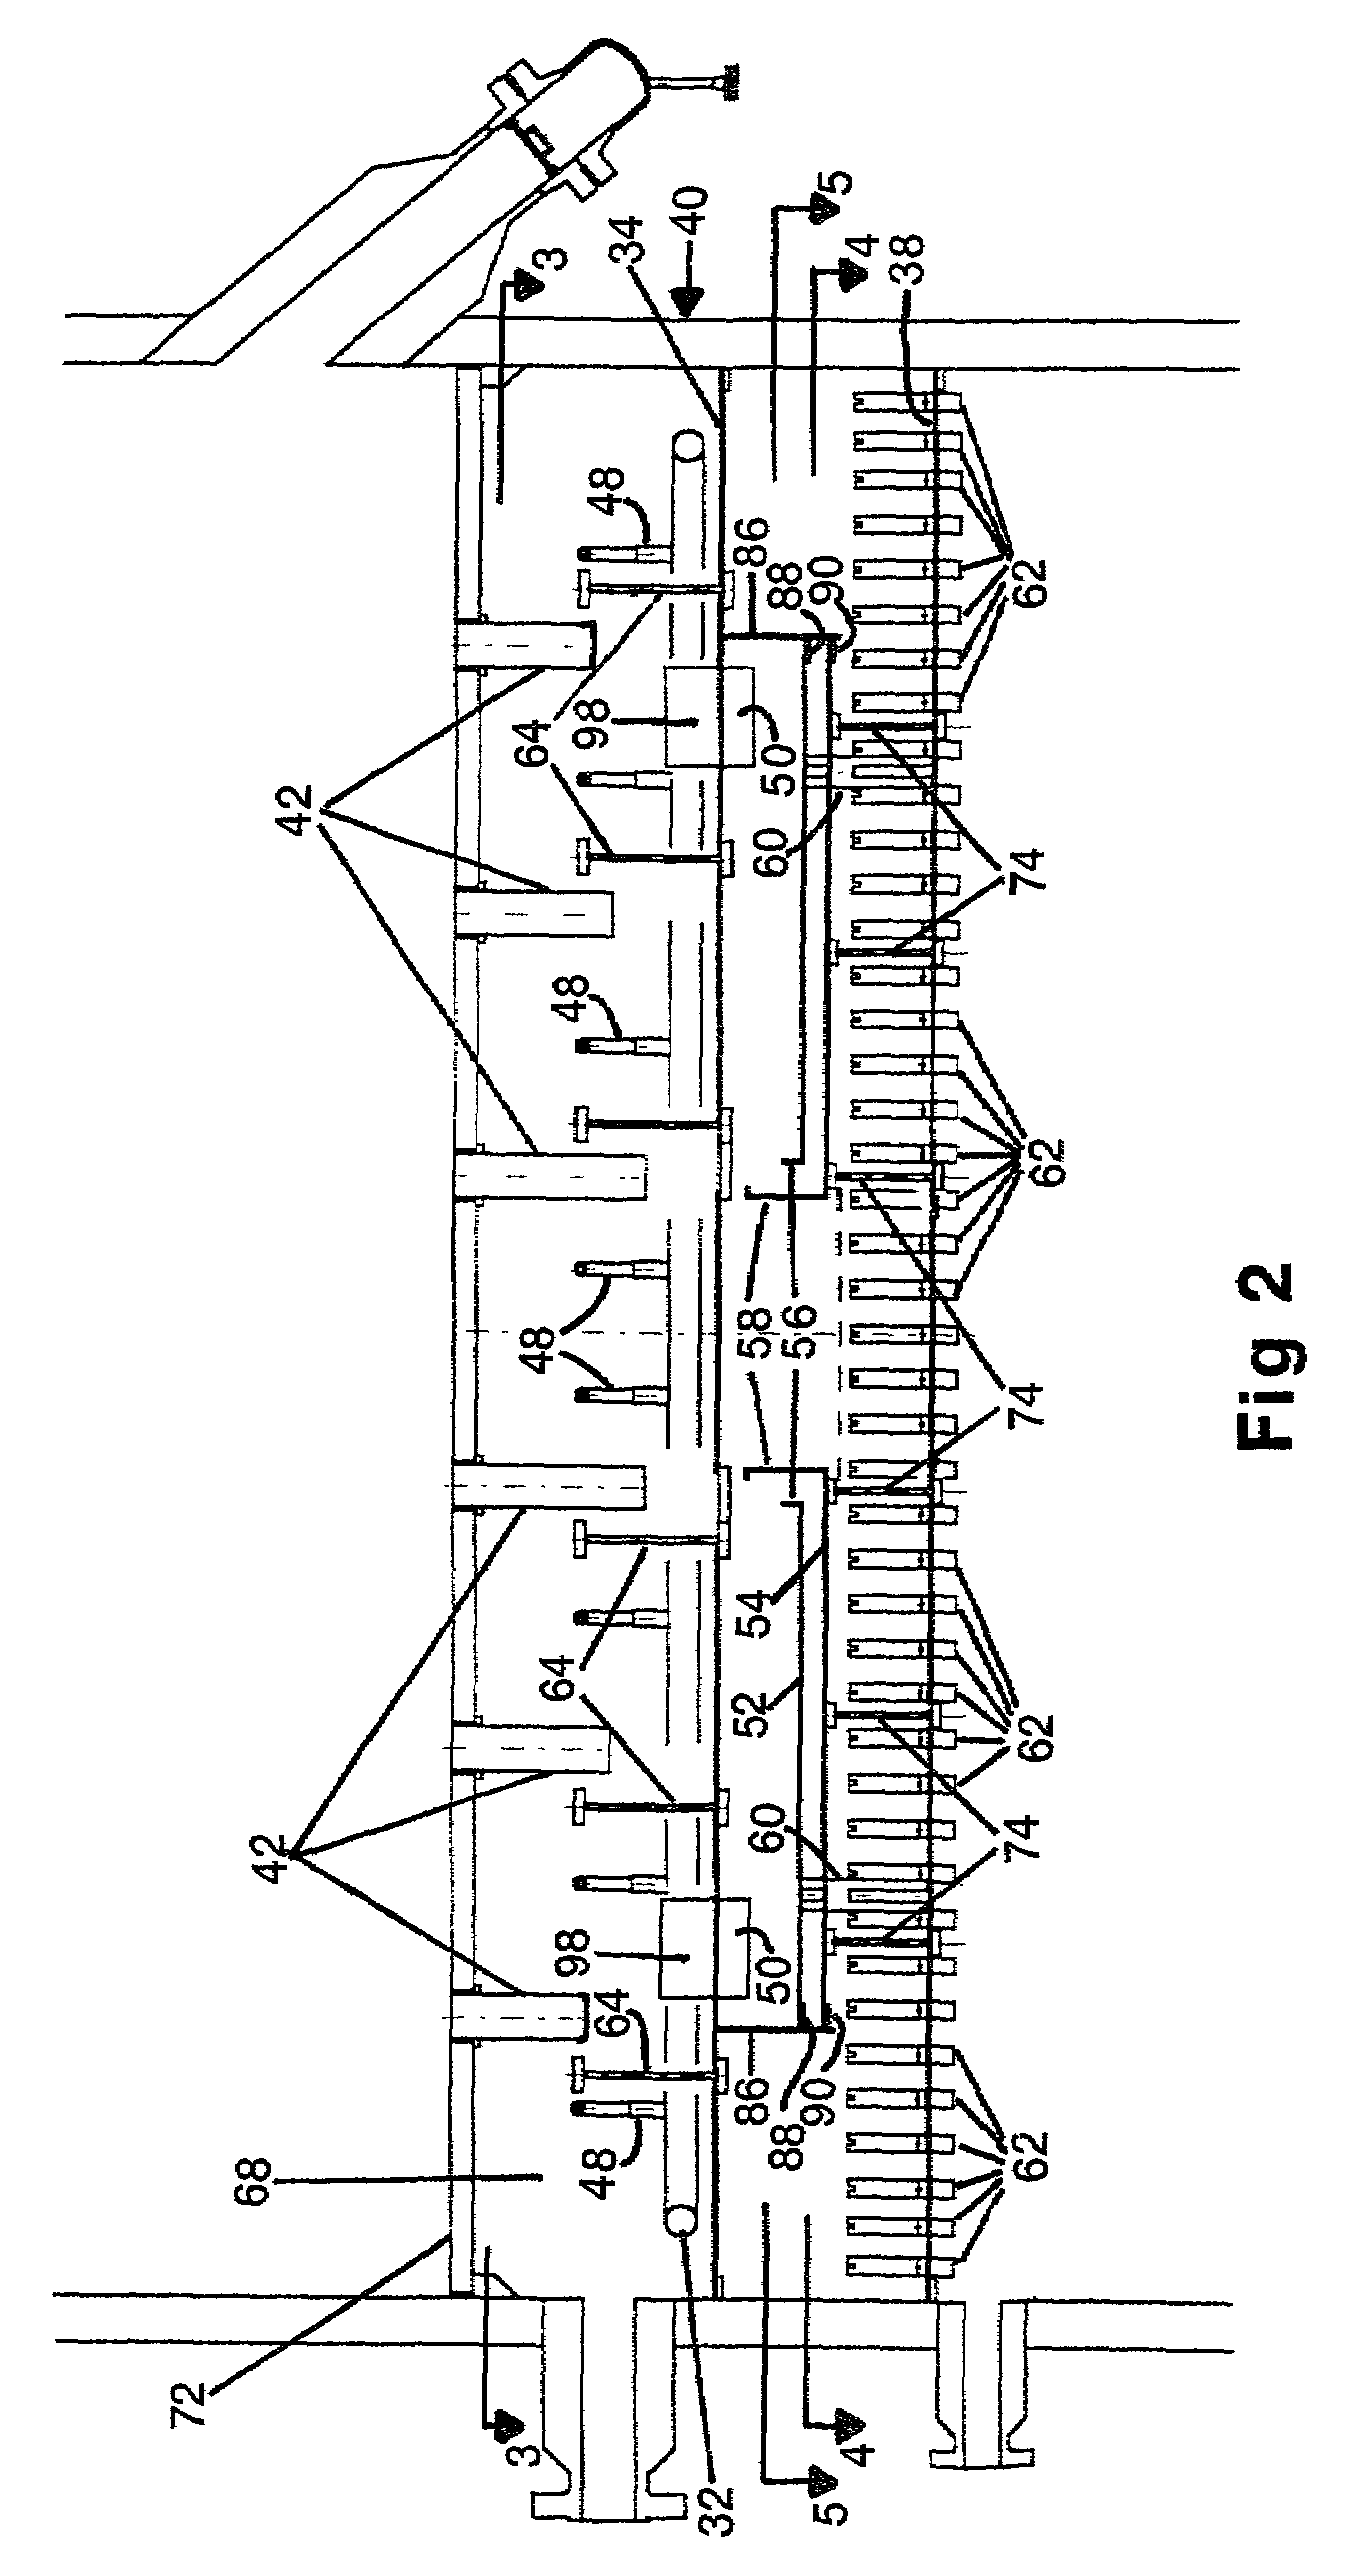 Quench box for a multi-bed, mixed-phase cocurrent downflow fixed-bed reactor